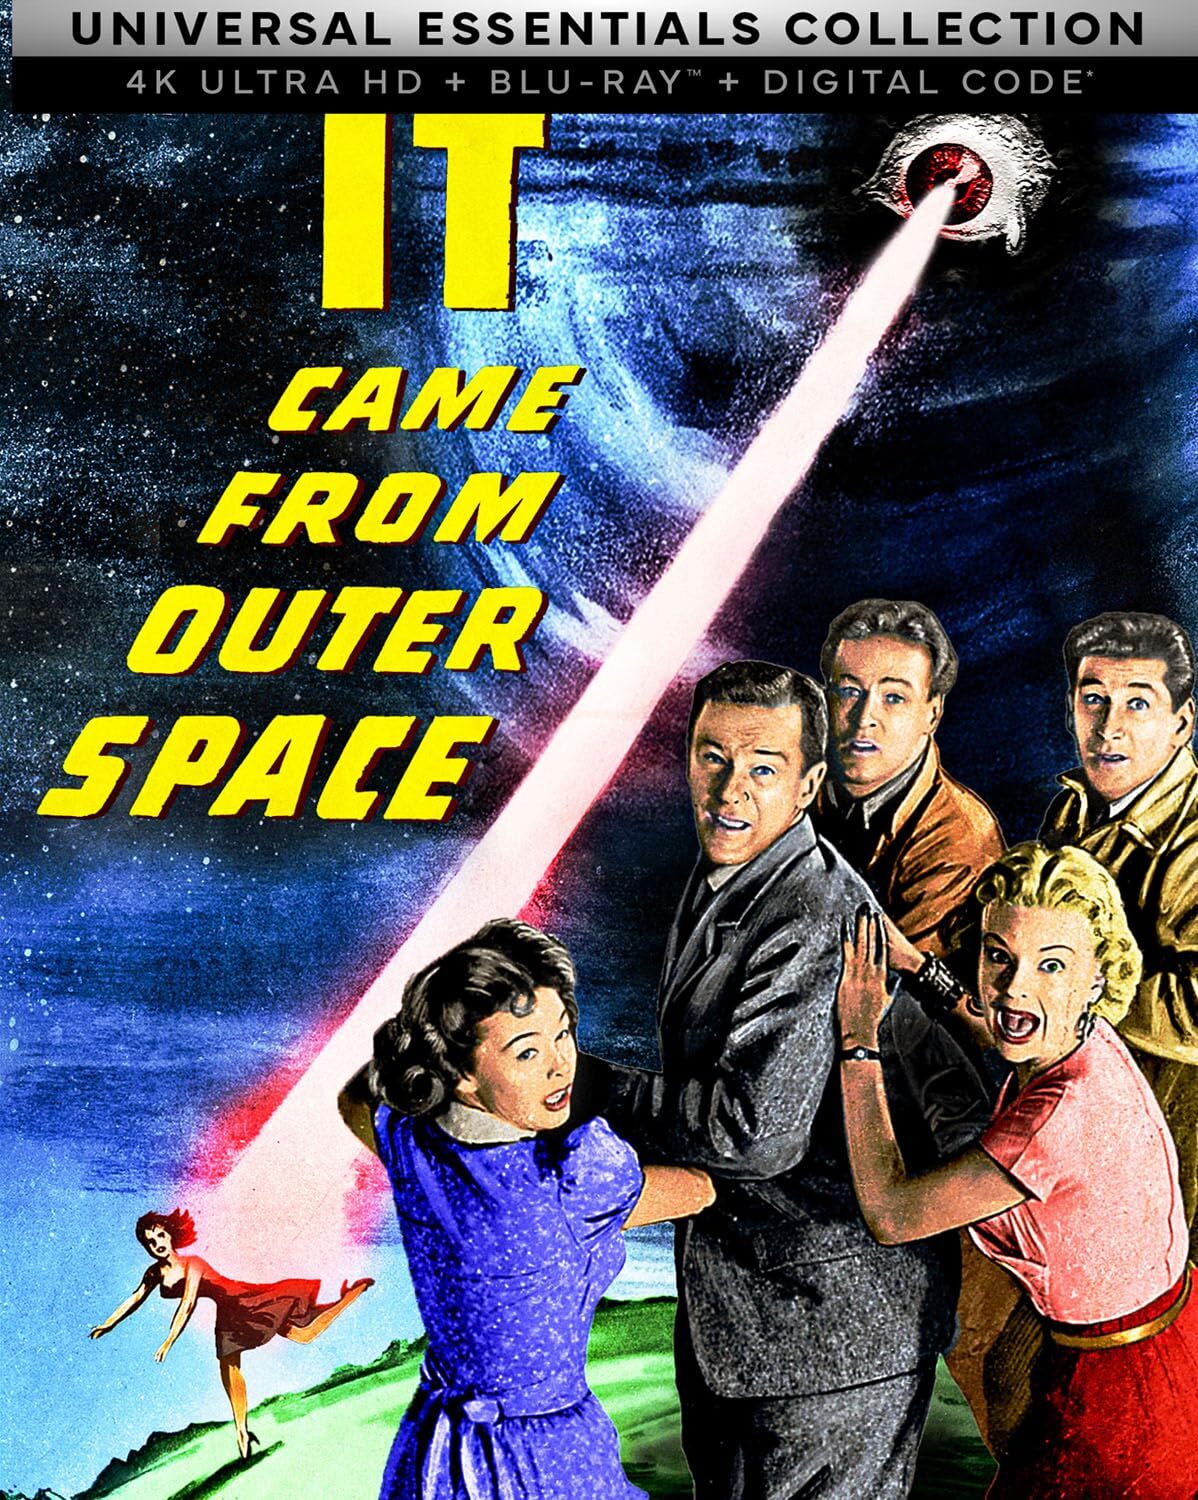 It Came From Outer Space 3D + 4K: Universal Essentials Collection